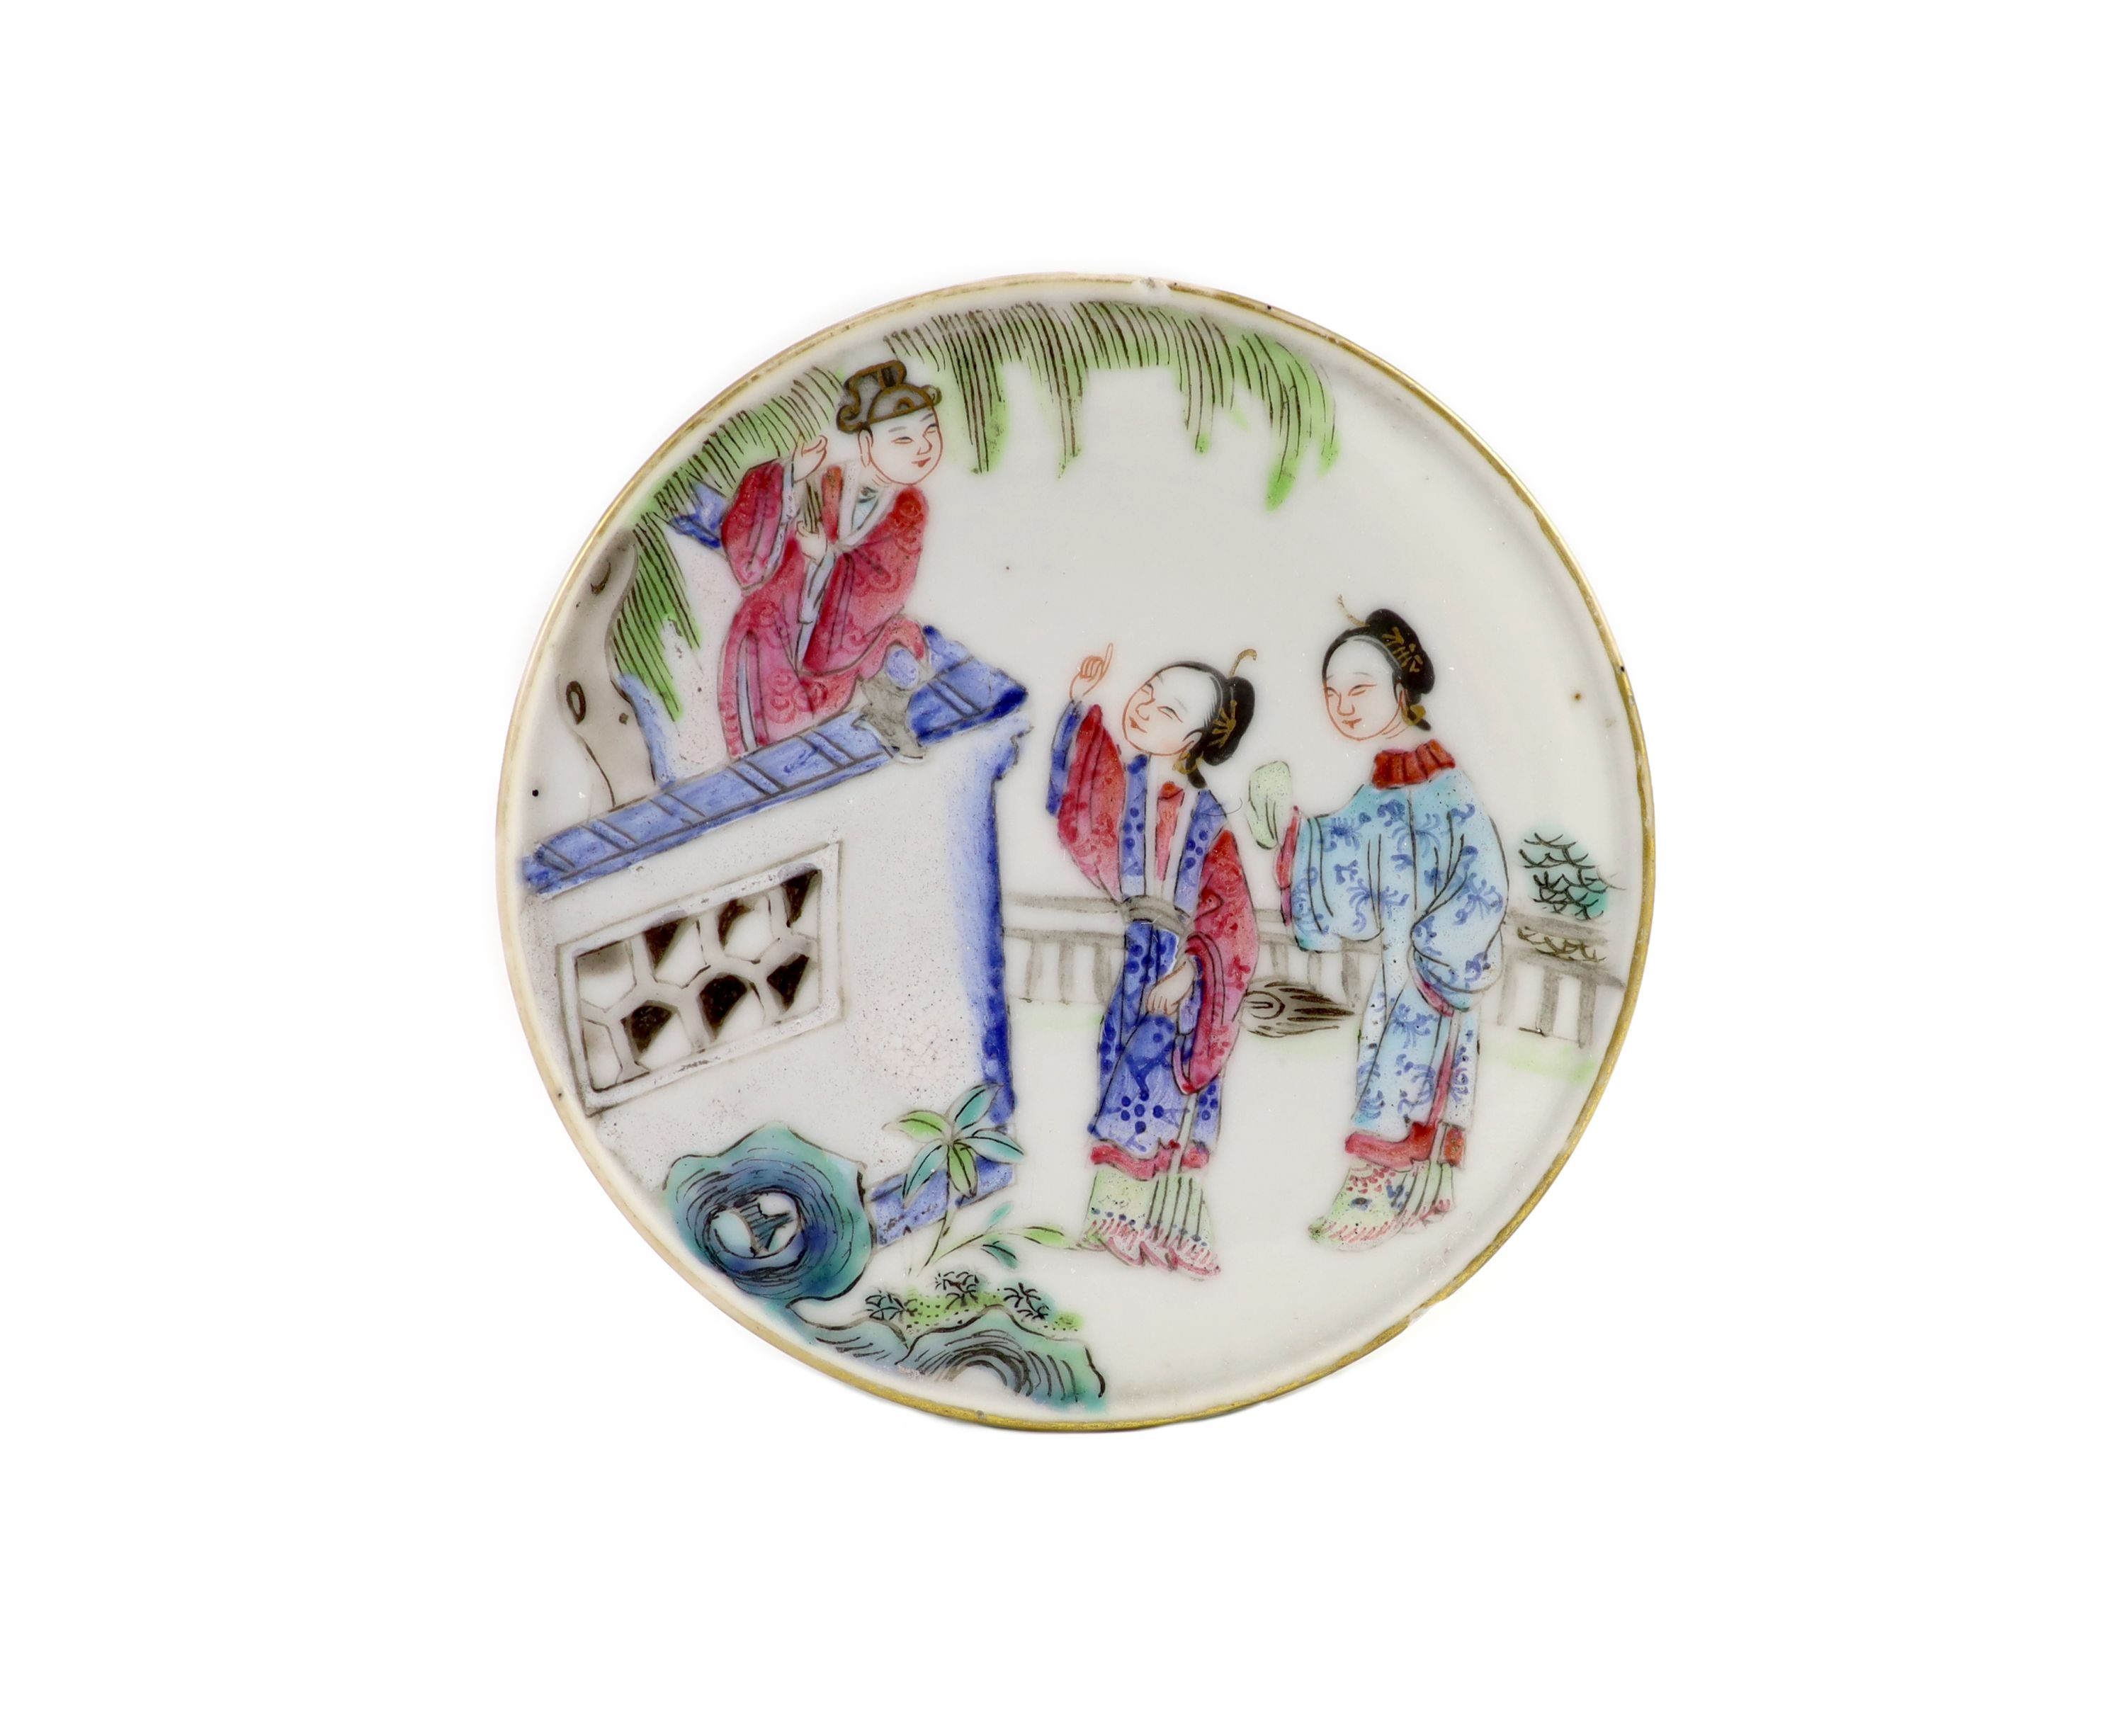 A Chinese famille rose drum-shaped box and cover, Jiaqing six character mark and period (1796-1820), 17.9 cm diameter